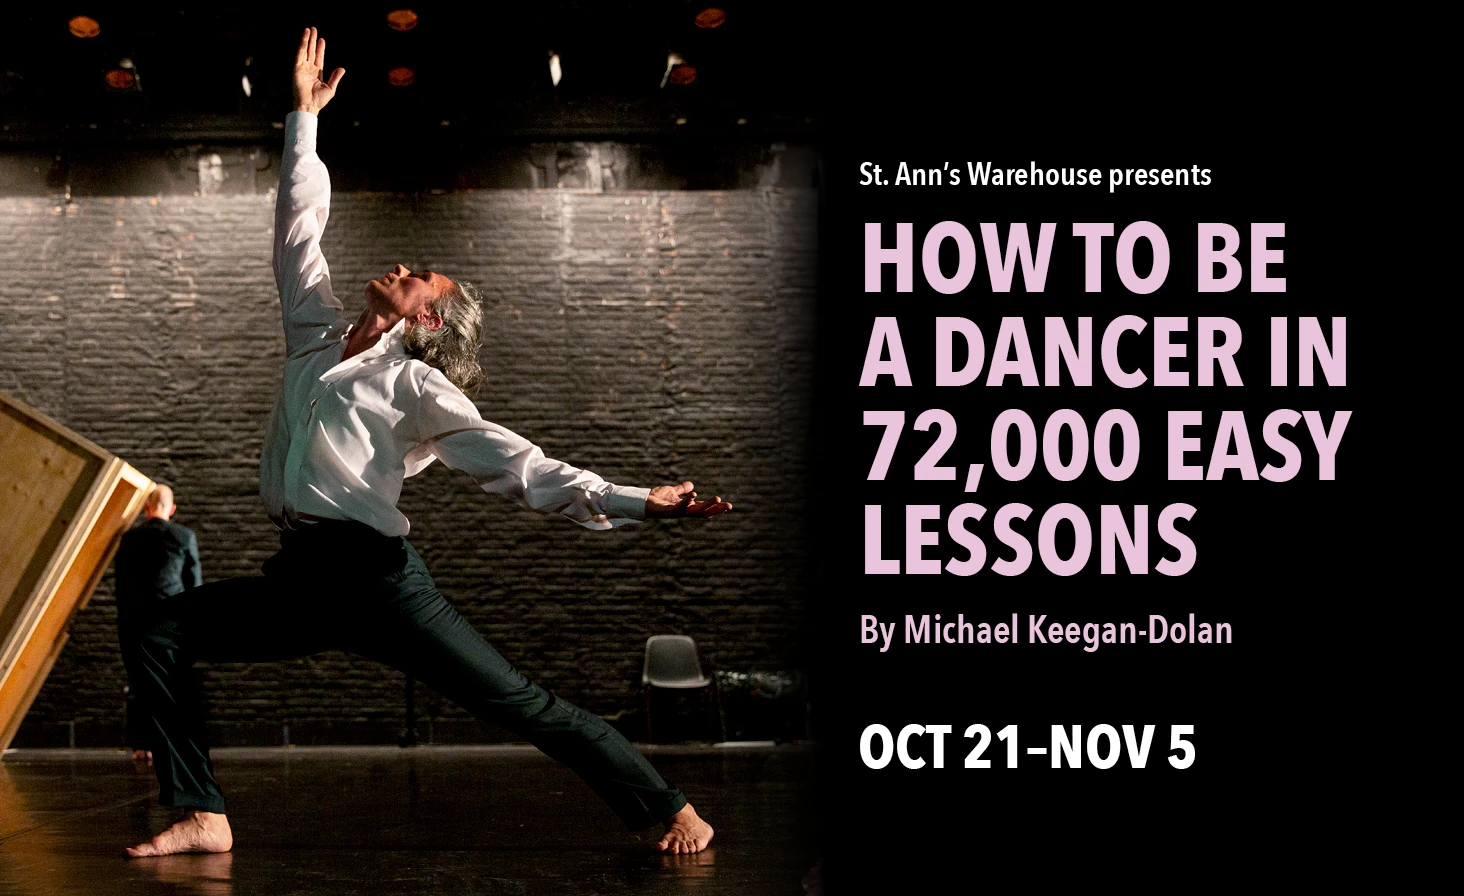 How To Be A Dancer In 72,000 Easy Lessons: What to expect - 4